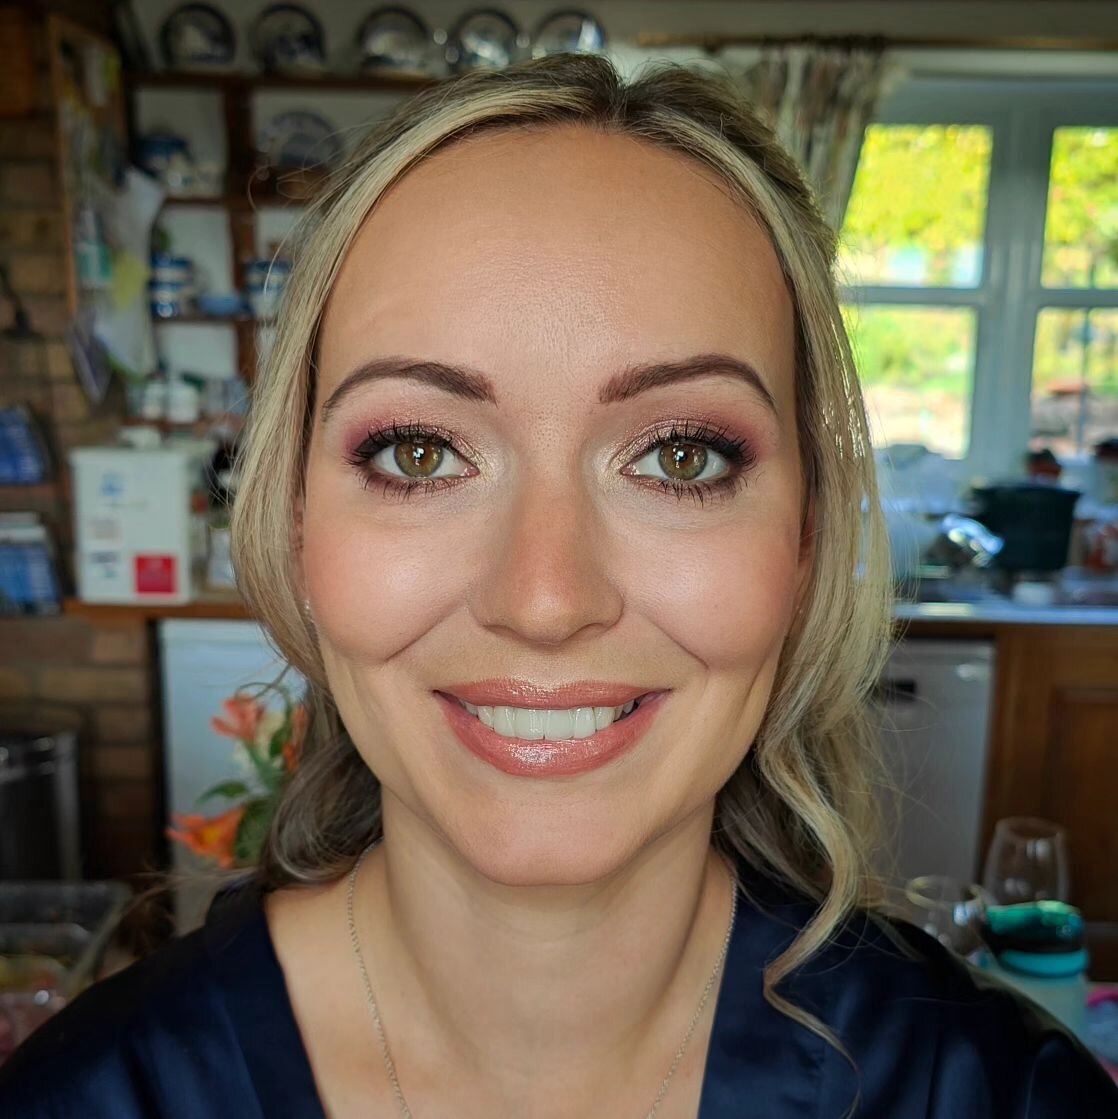 Bridesmaid Beauty 💕

I absolutely LOVE this colour combo for wedding glam. So flattering. 
Jinny's skin looks absolutely flawless here too 😍

#warwickshiremua #warwickshiremakeupartist #leamingtonspamakeupartist #midlandsmakeupartist #midlandsmua #